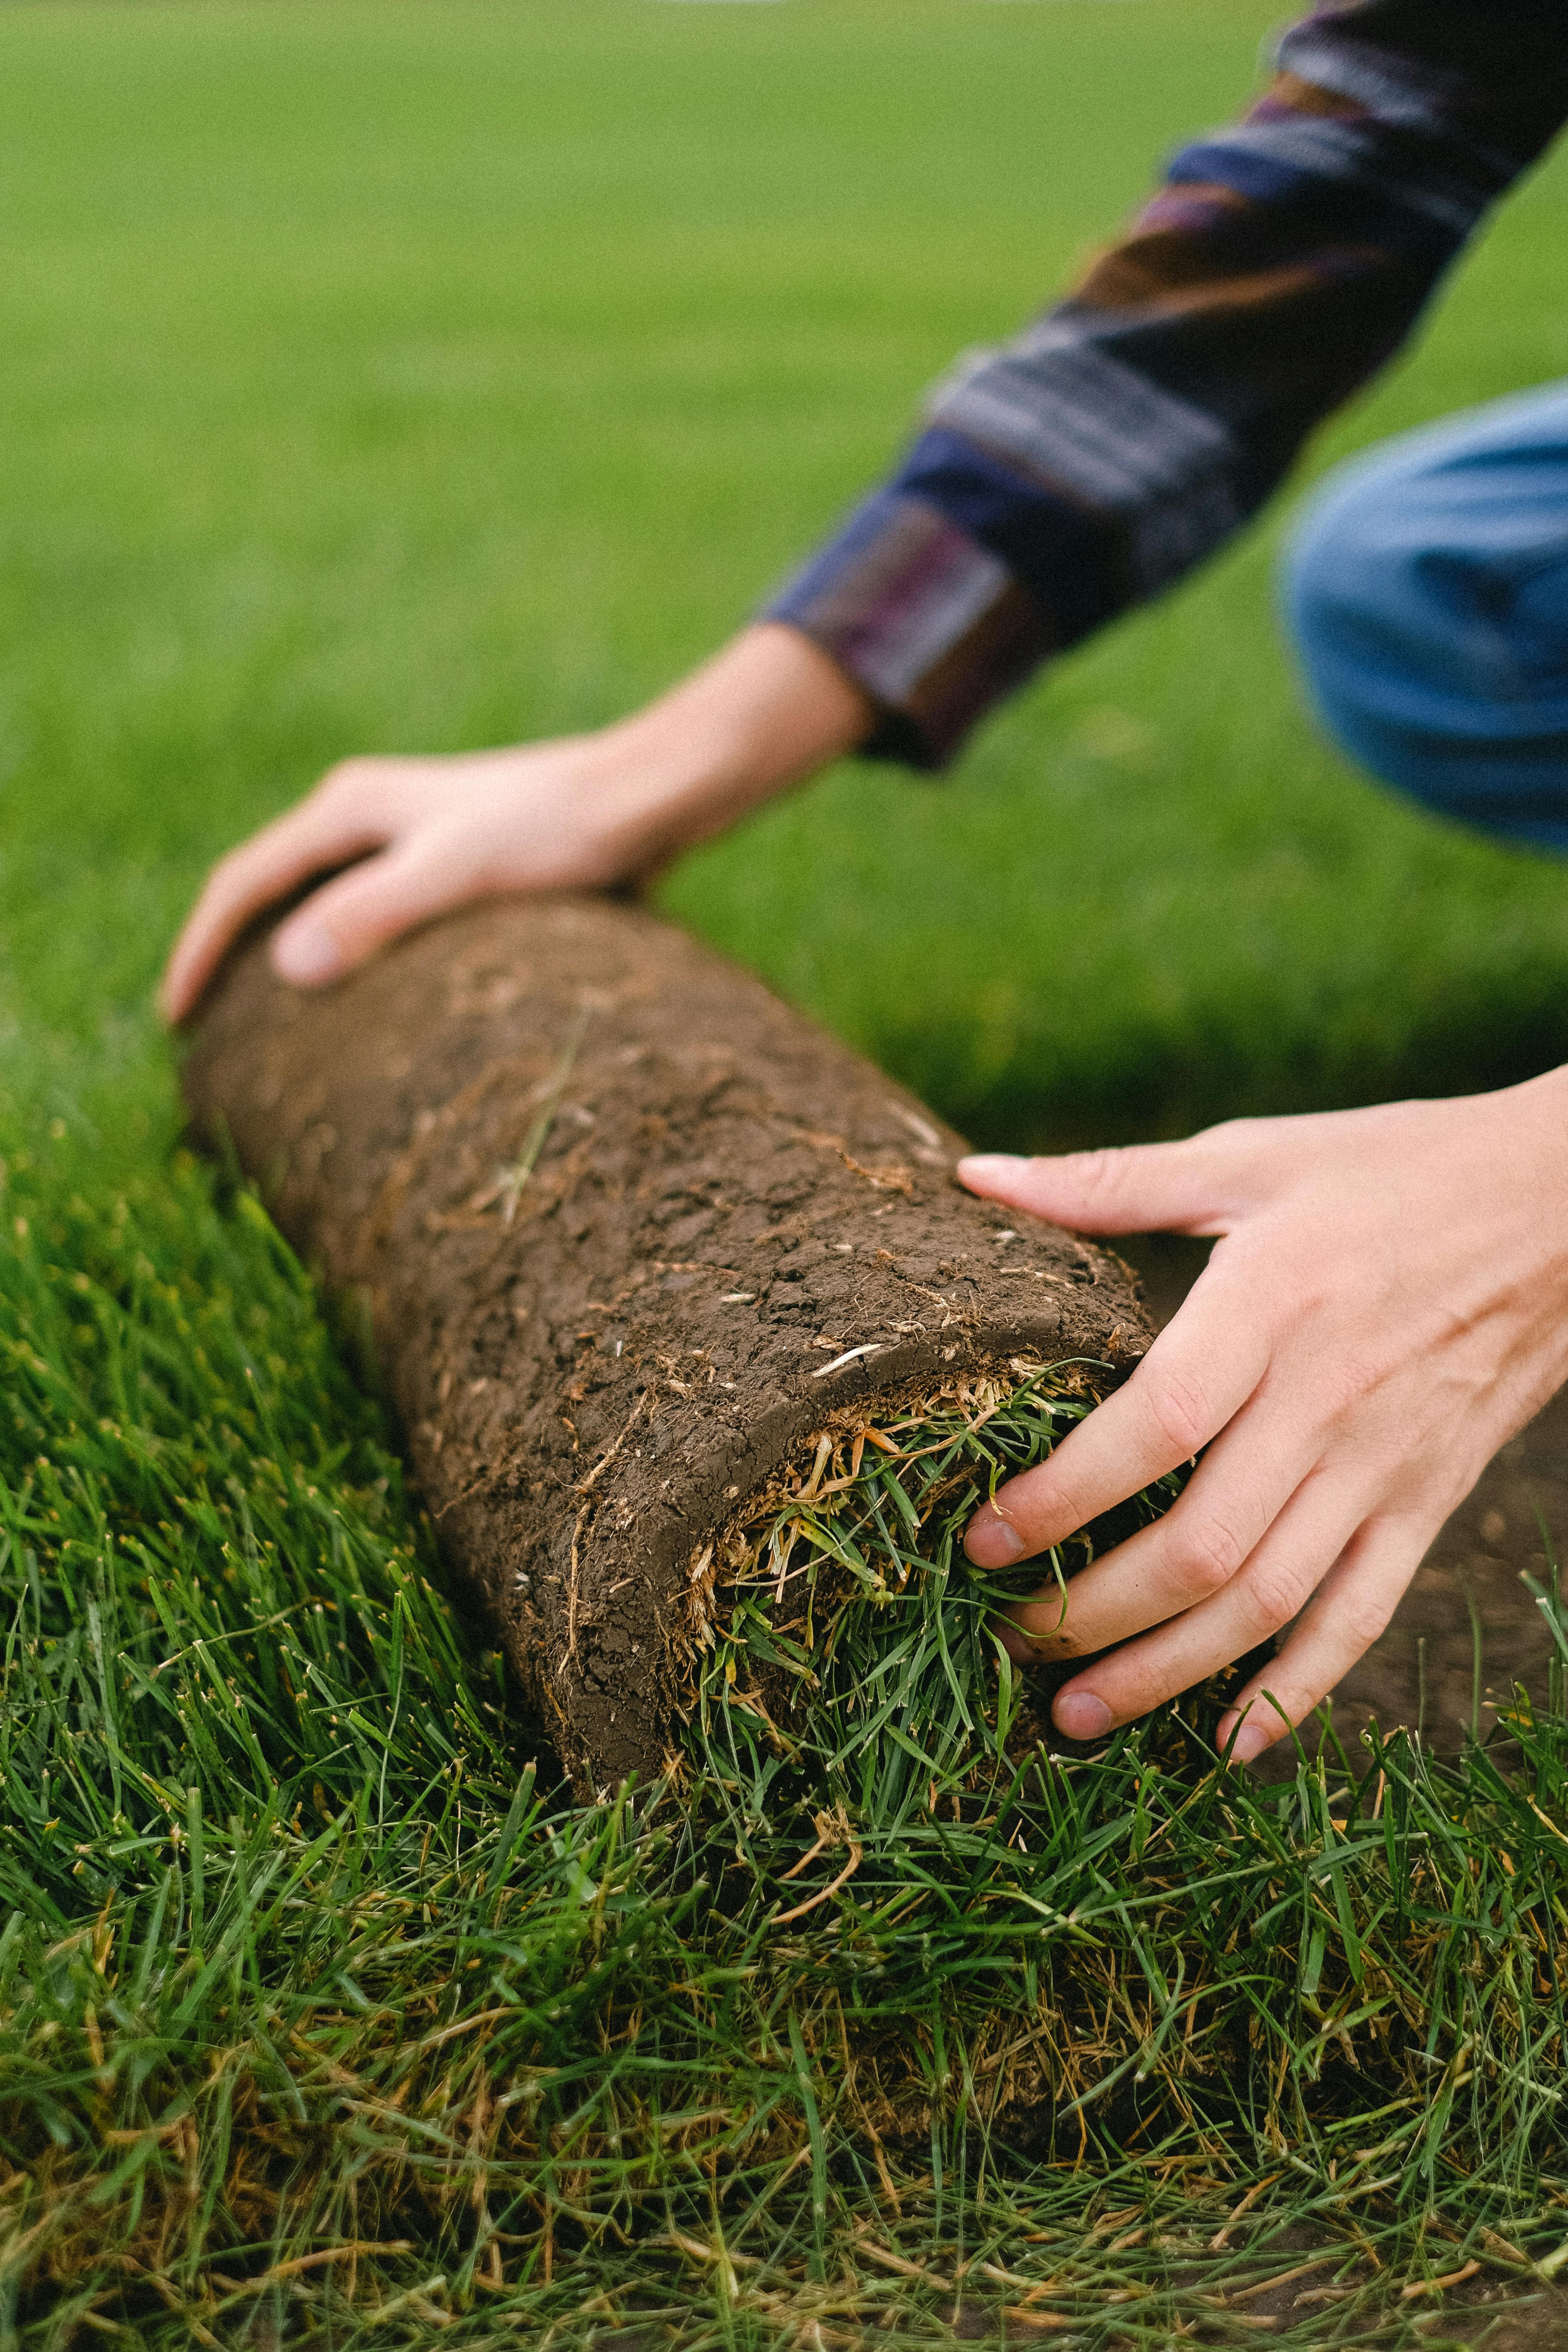 Skibo Services expert installing sod for lush, green lawns with meticulous care and expertise.